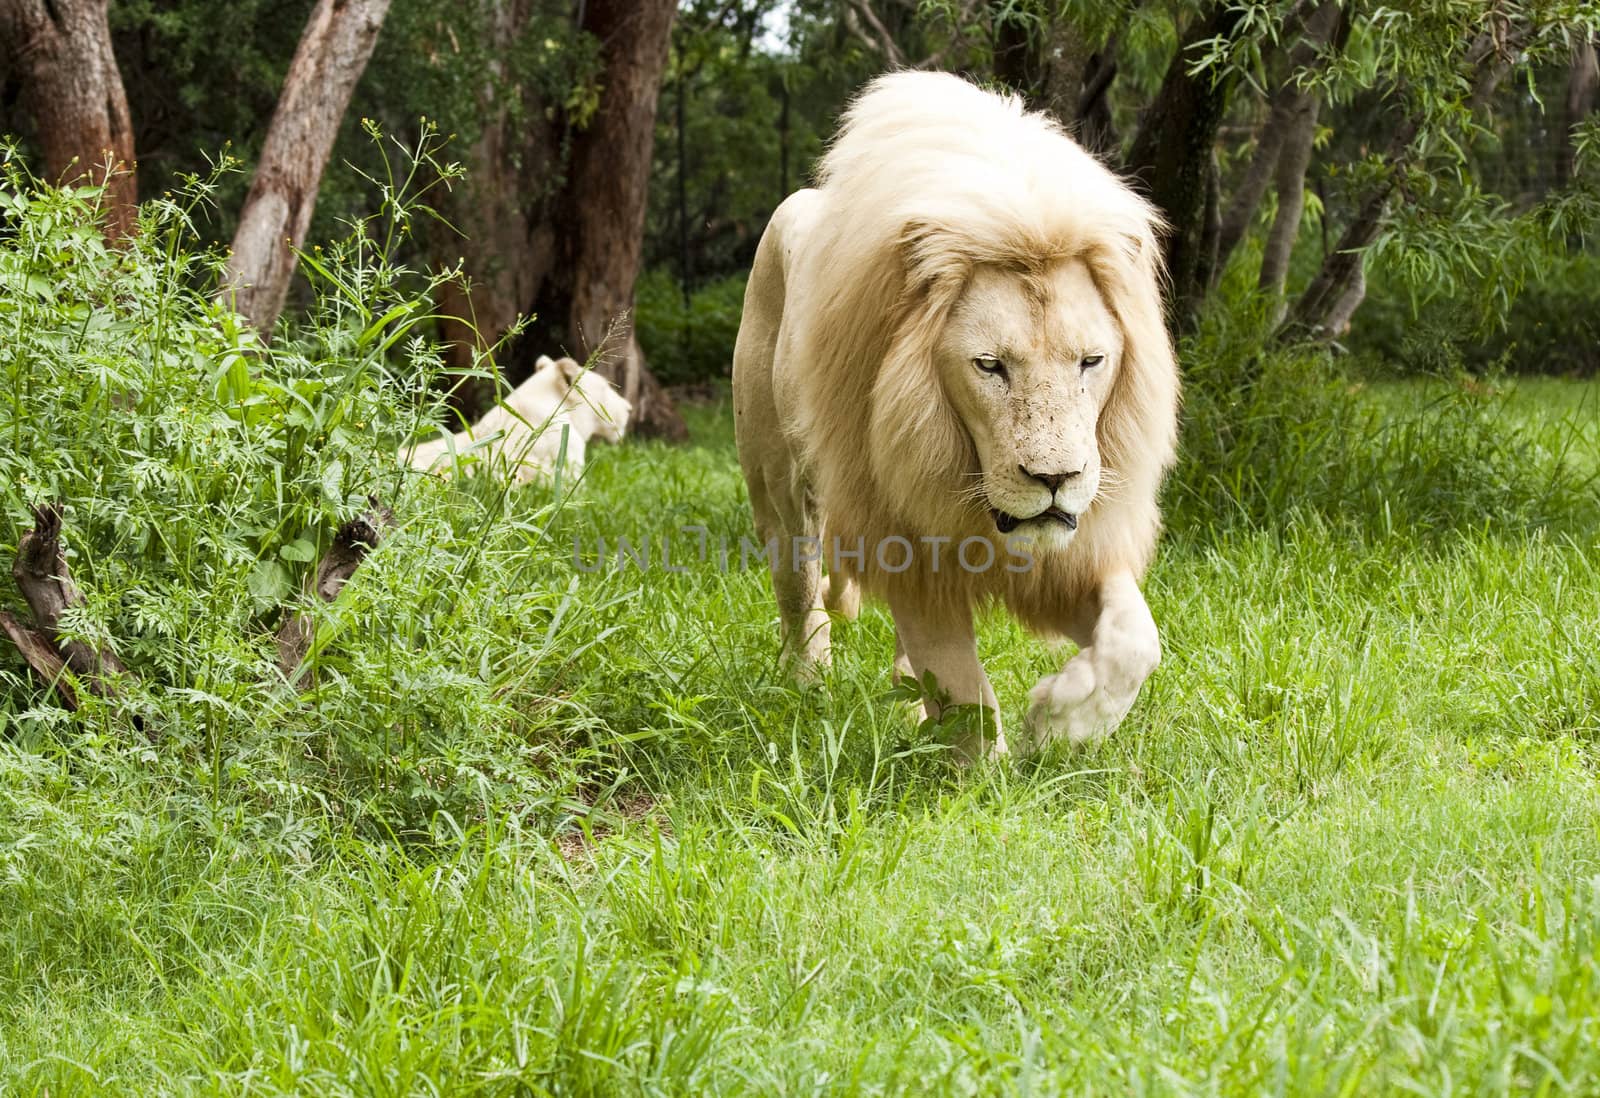 Young Walking Lion by ChrisAlleaume